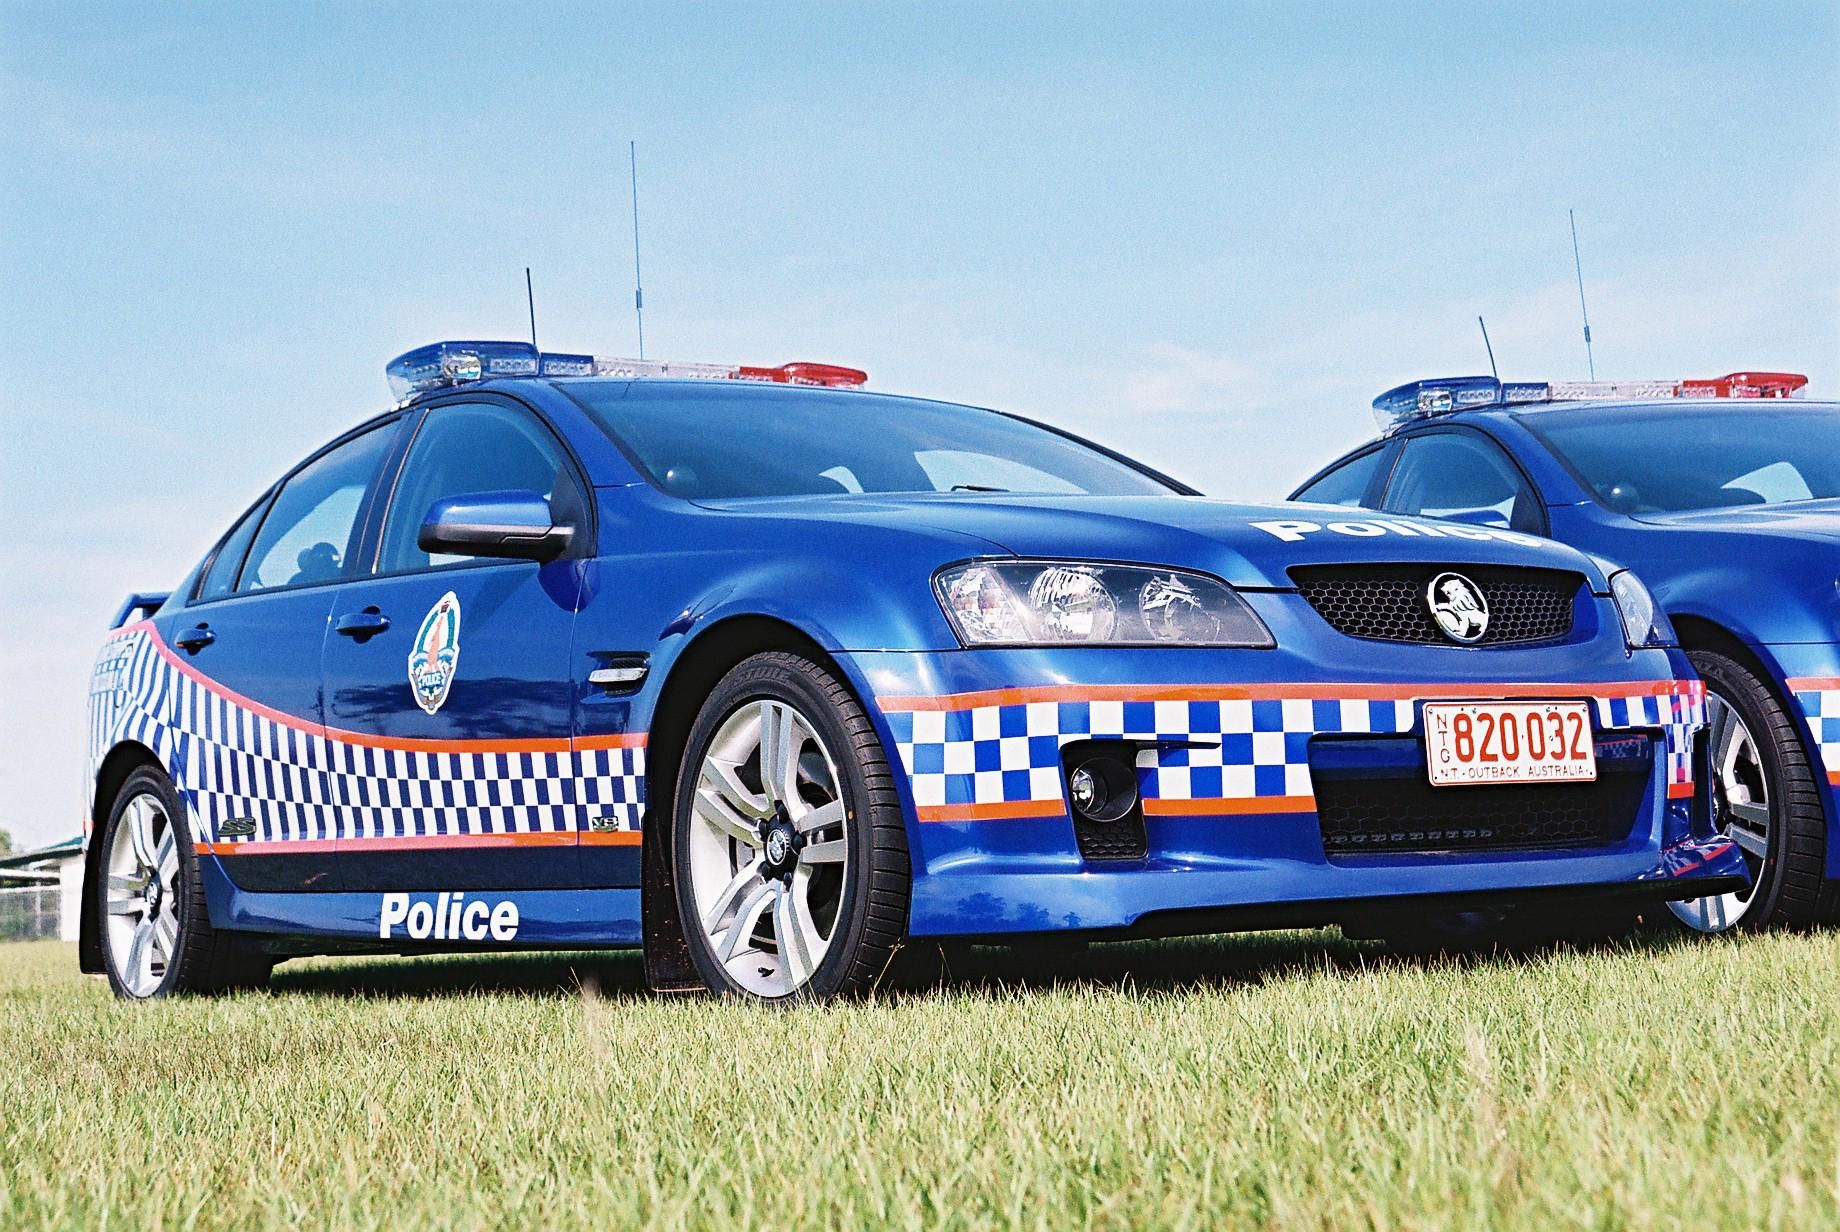 1991 Holden Ve Commodore Police Car